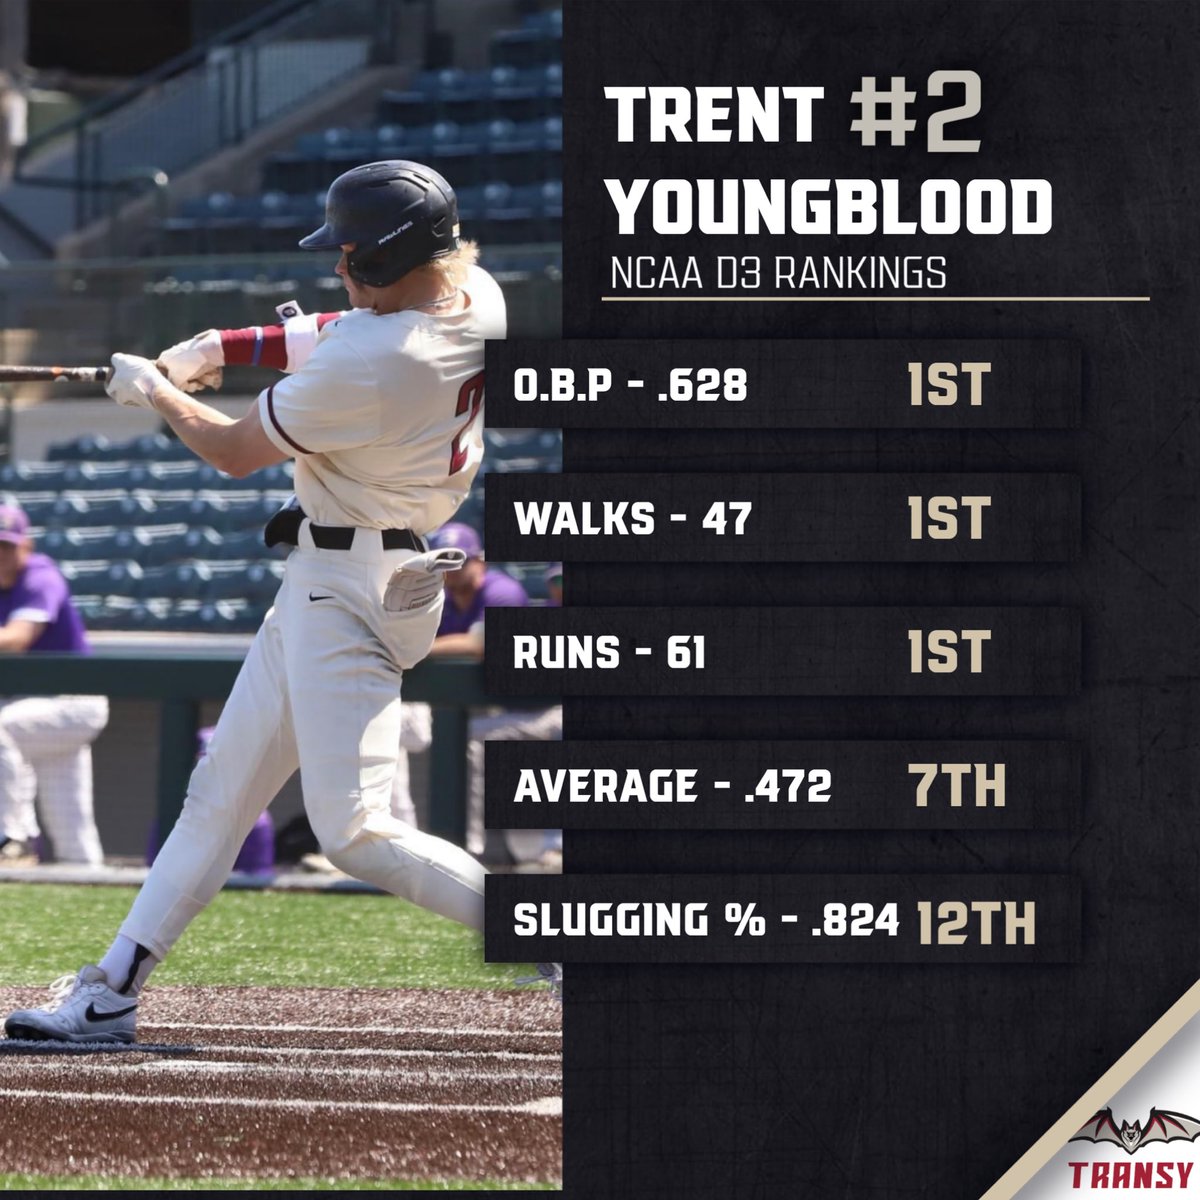 Trent Youngblood (@tyoung_blood2) has been on a mission this season. #FlyPios🦇 | @TransyBaseball